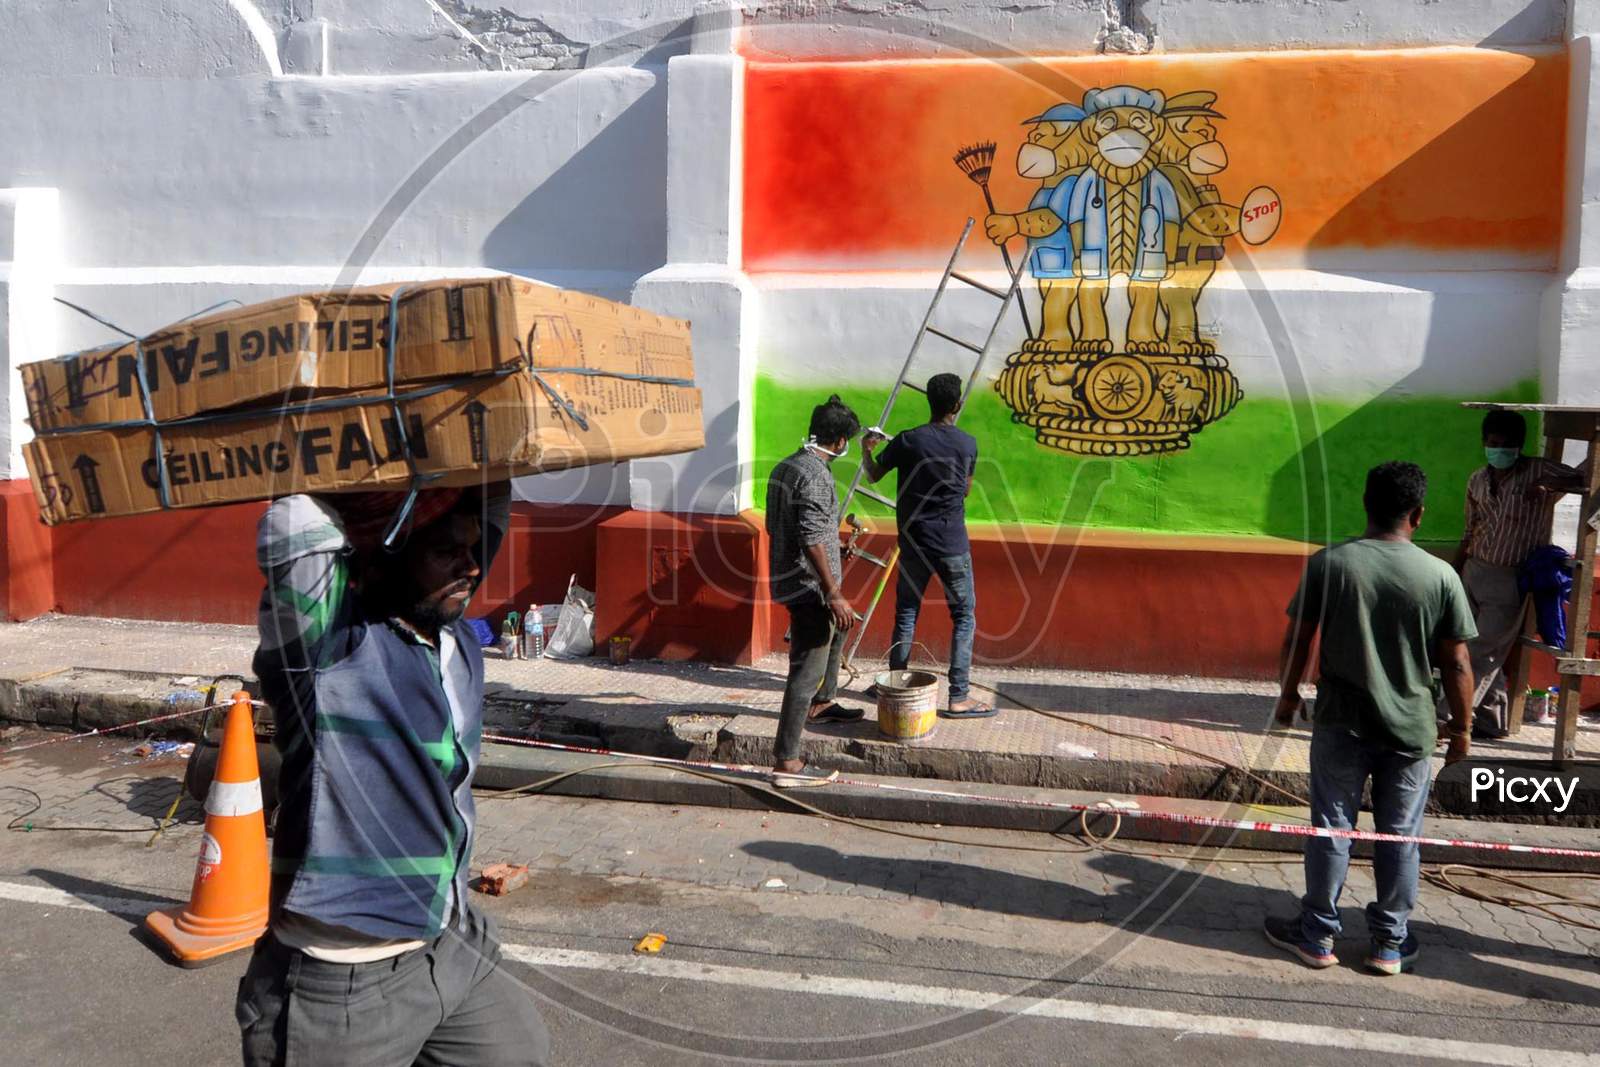 Artists Draw A  Mural On A Wall To Spread  Awareness  During Nationwide Lockdown  Amidst Coronavirus Or COVID-19 Pandemic  In Guwahati, Wednesday, May 6, 2020.